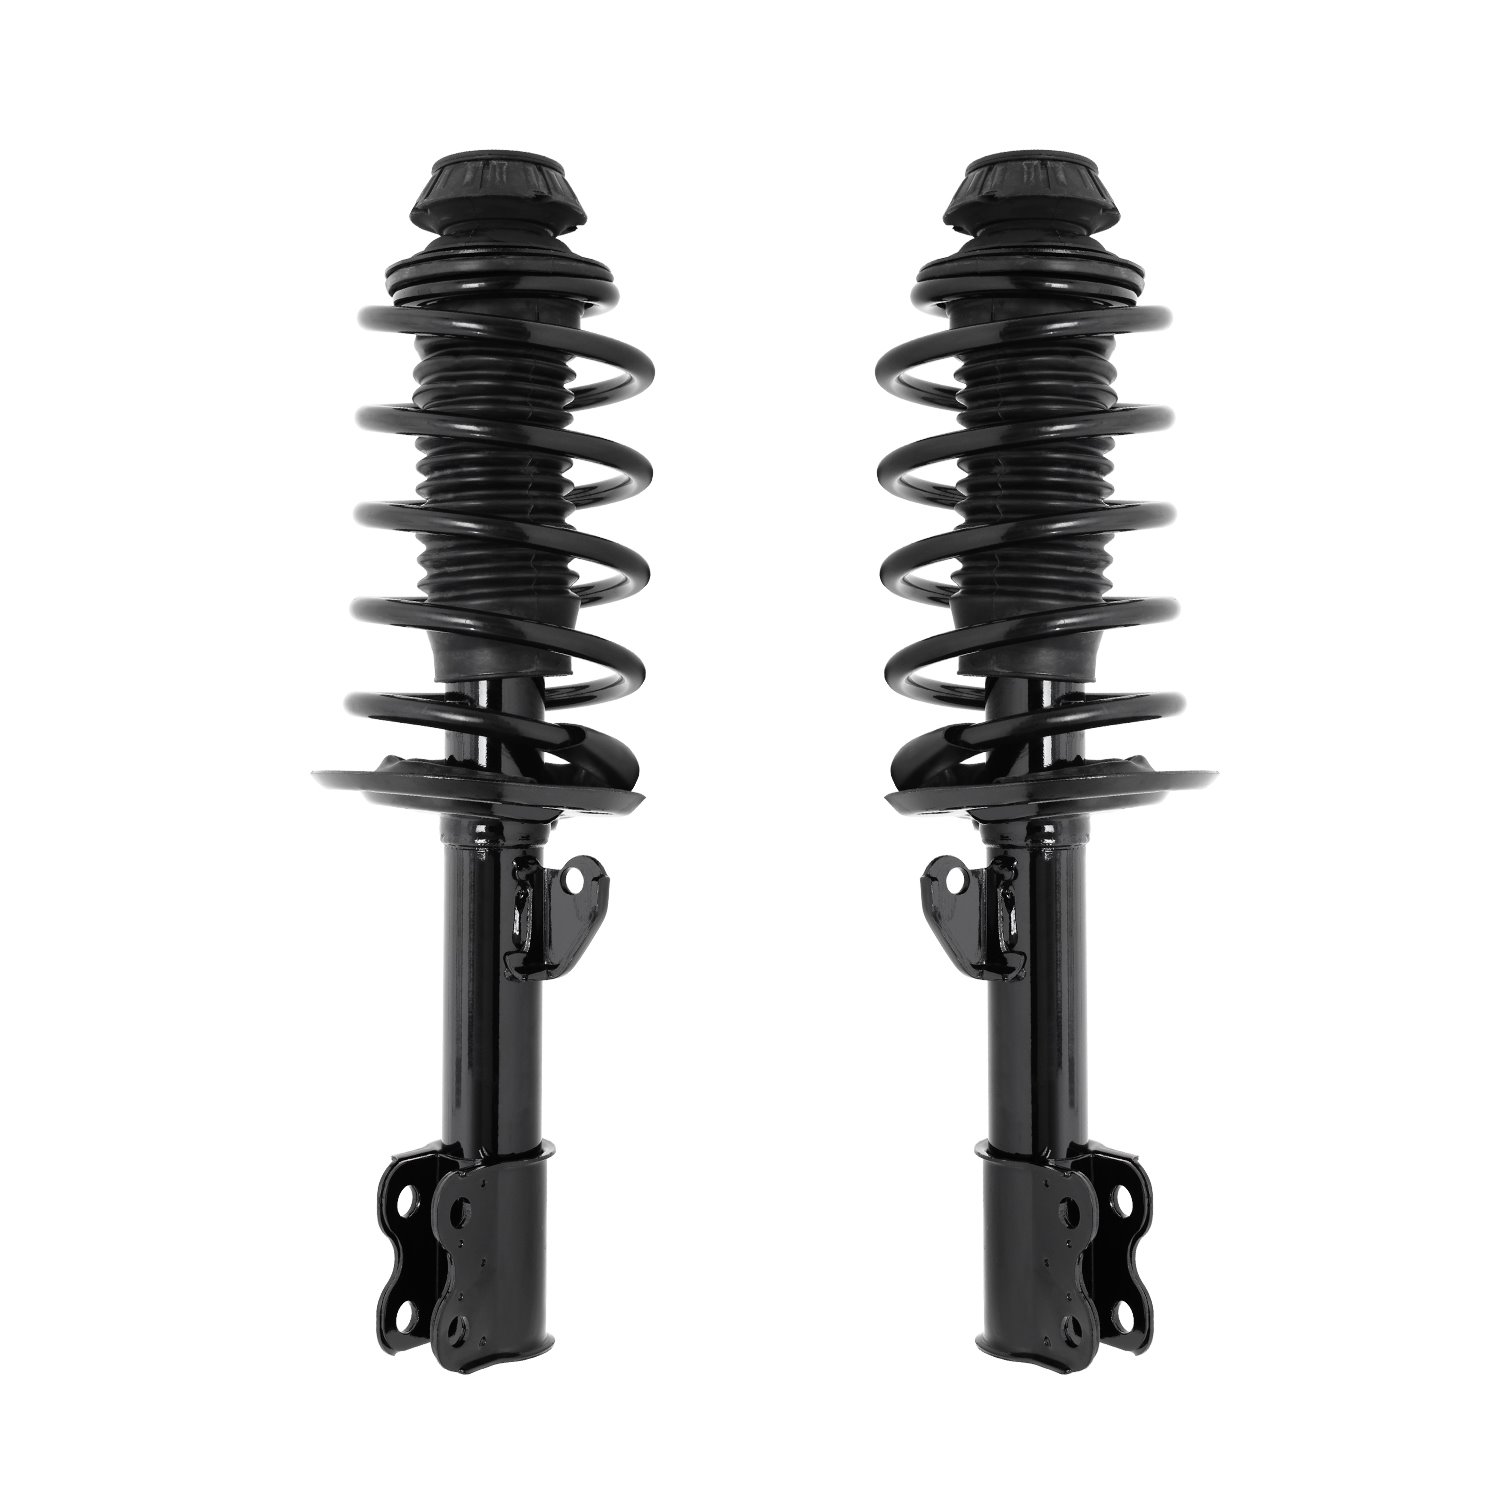 2-11108-11109-001 Suspension Strut & Coil Spring Assembly Set Fits Select Toyota Prius C